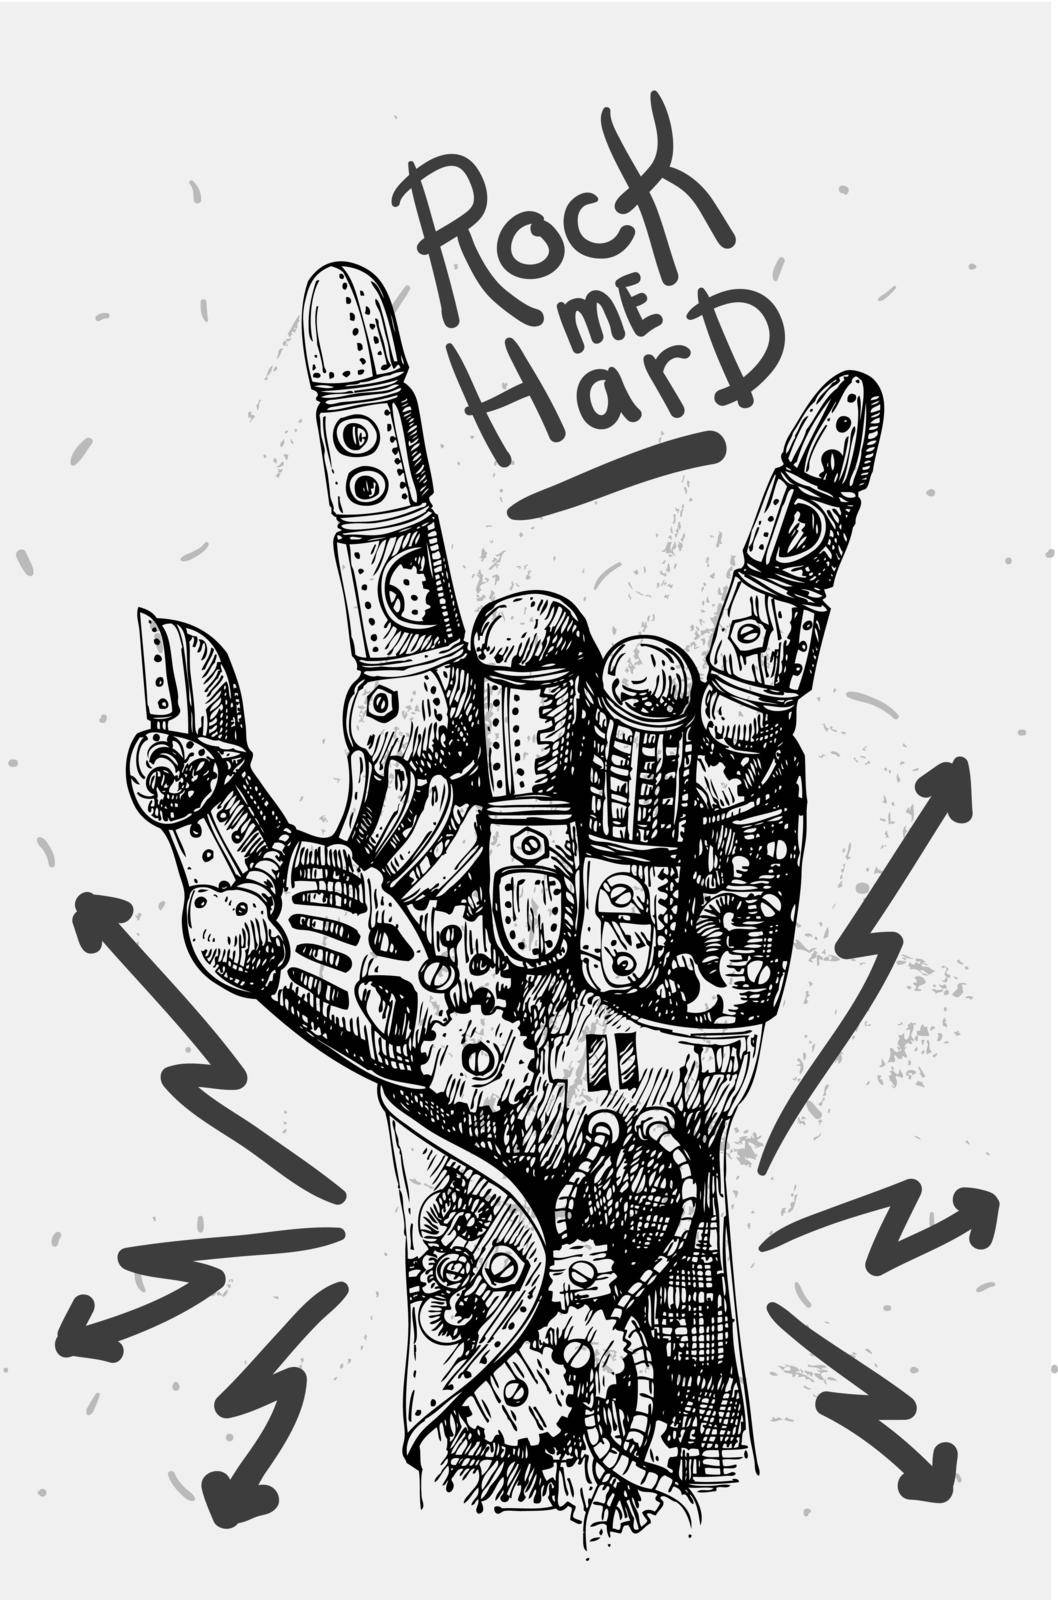 Beautiful hand drawn vector illustration mechanical hand. Rock style. Good for invitations, covers for smartphones, textiles, t-shirts, postcards, rock festival.